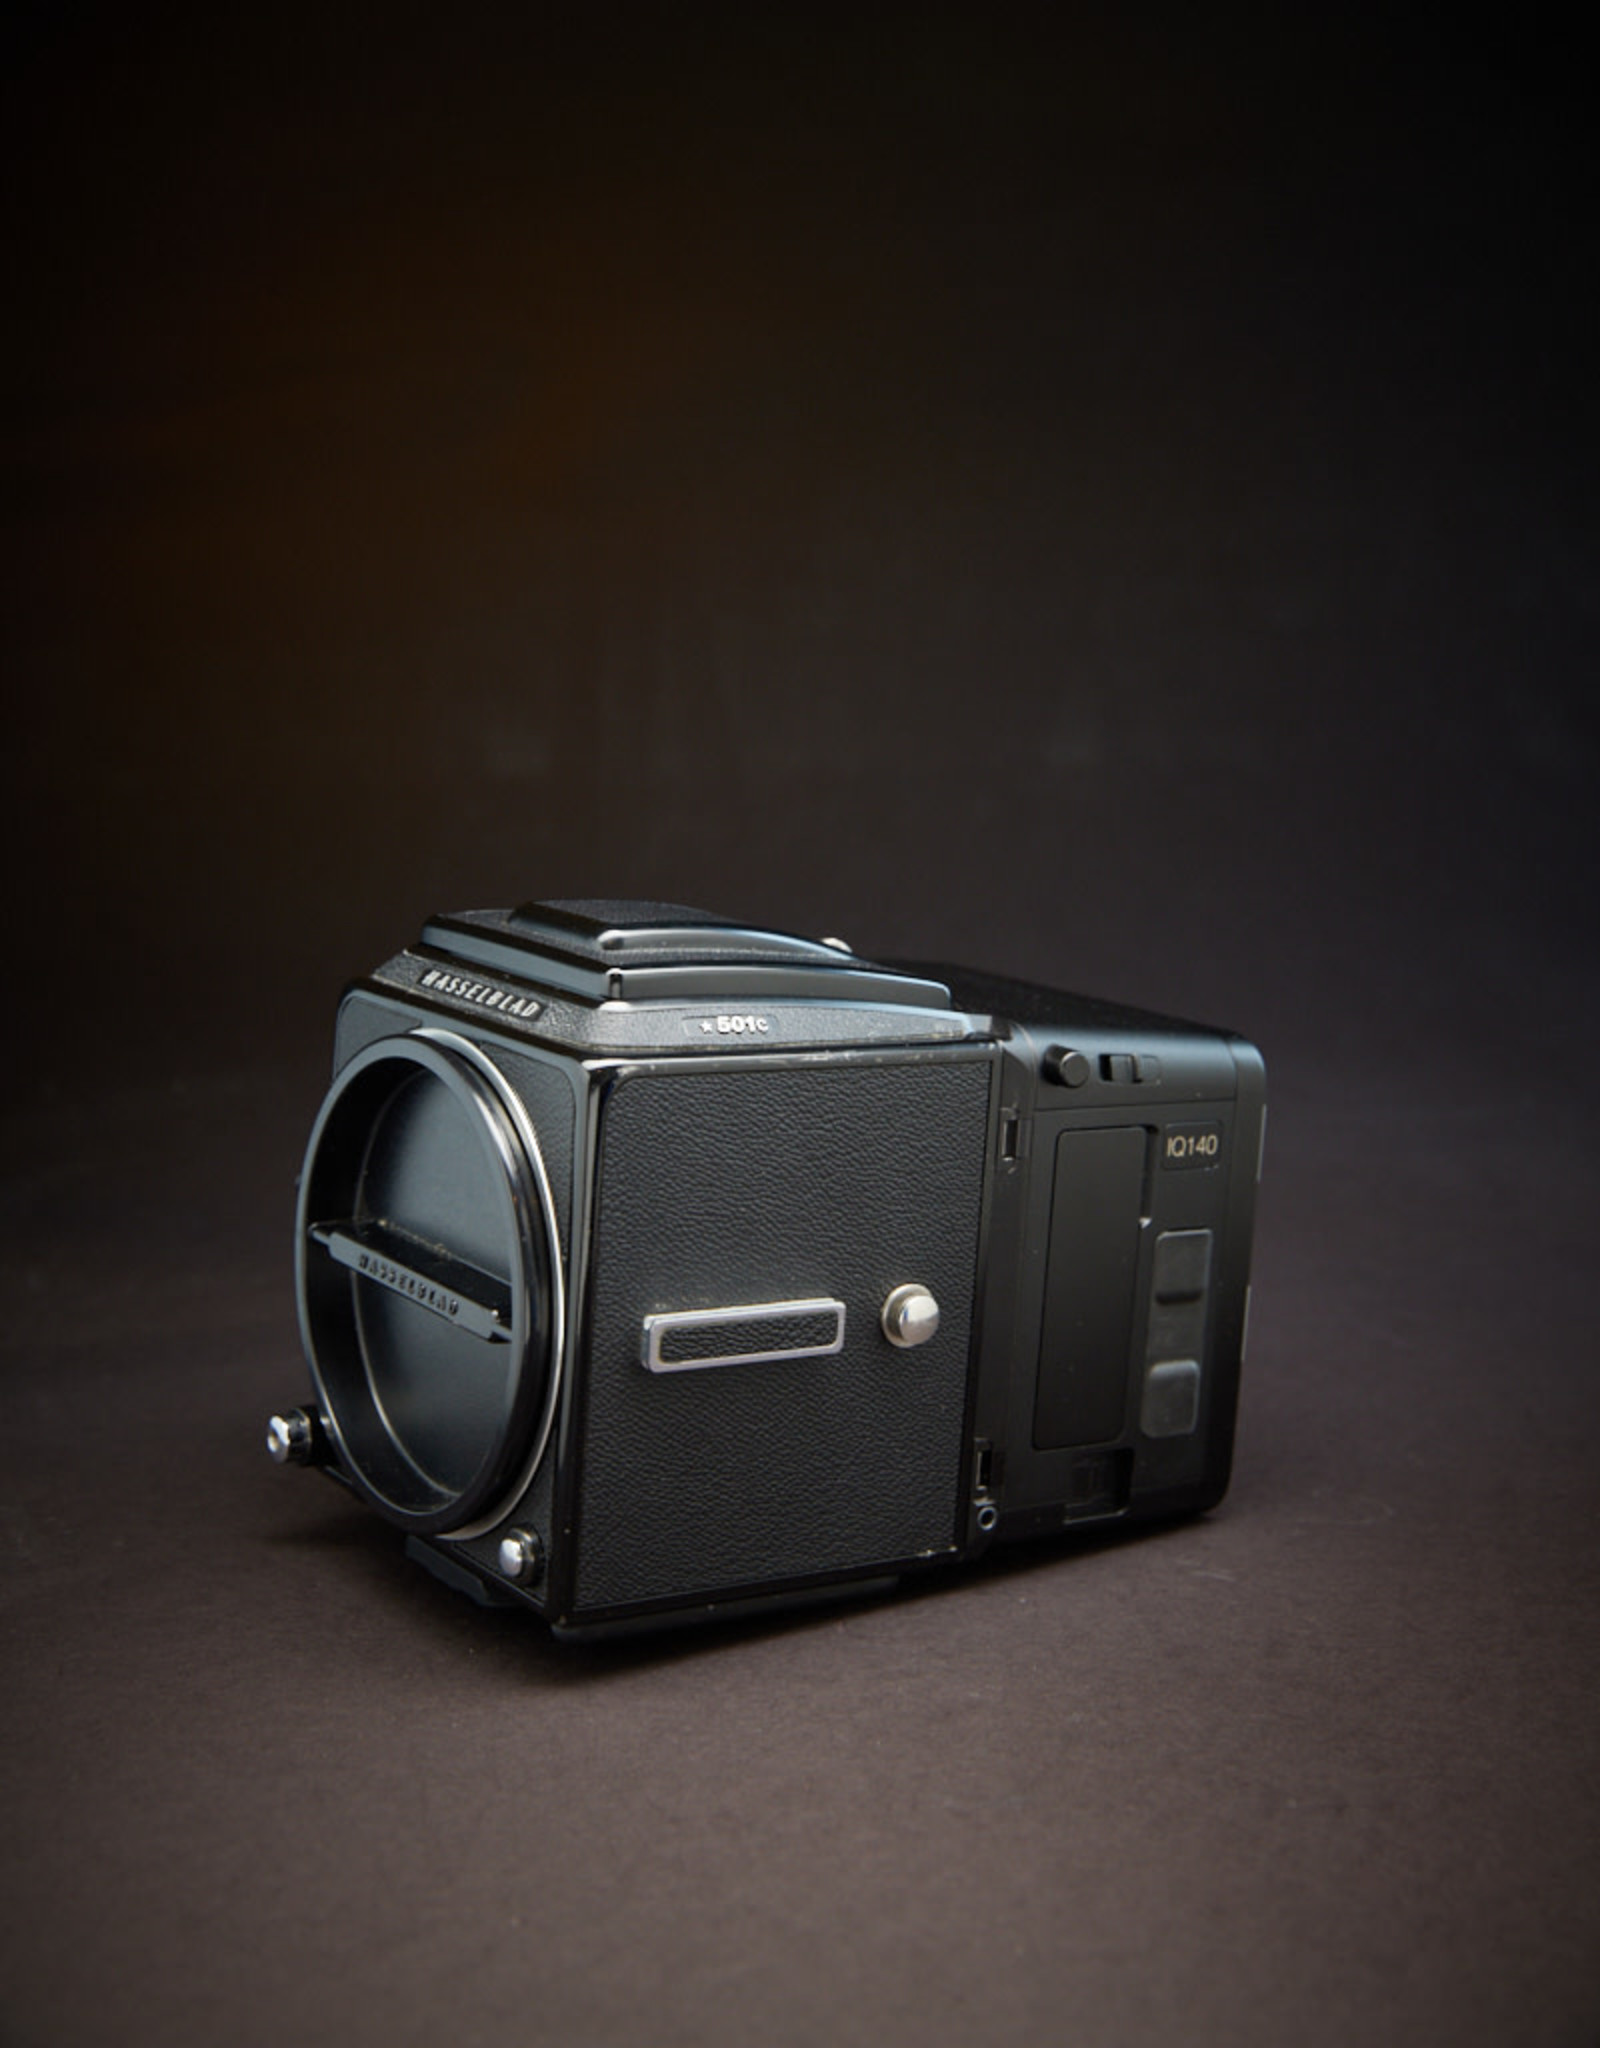 Hasselblad USED - Hasselblad 501C Body with Phase One IQ1 40 Digital Back. Condition 8.